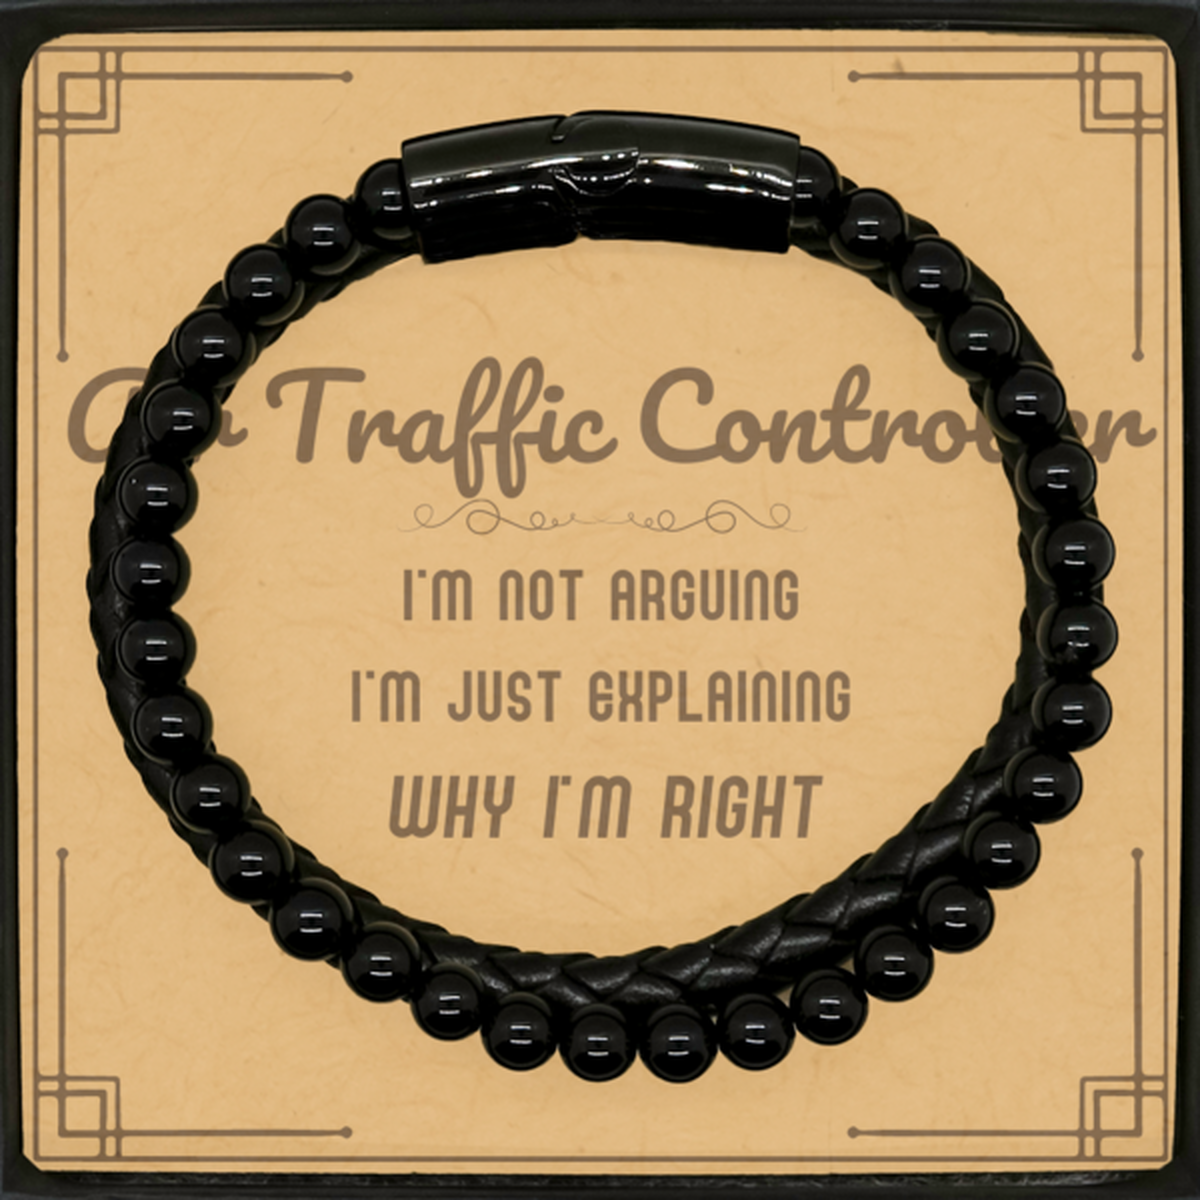 Air Traffic Controller I'm not Arguing. I'm Just Explaining Why I'm RIGHT Stone Leather Bracelets, Funny Saying Quote Air Traffic Controller Gifts For Air Traffic Controller Message Card Graduation Birthday Christmas Gifts for Men Women Coworker